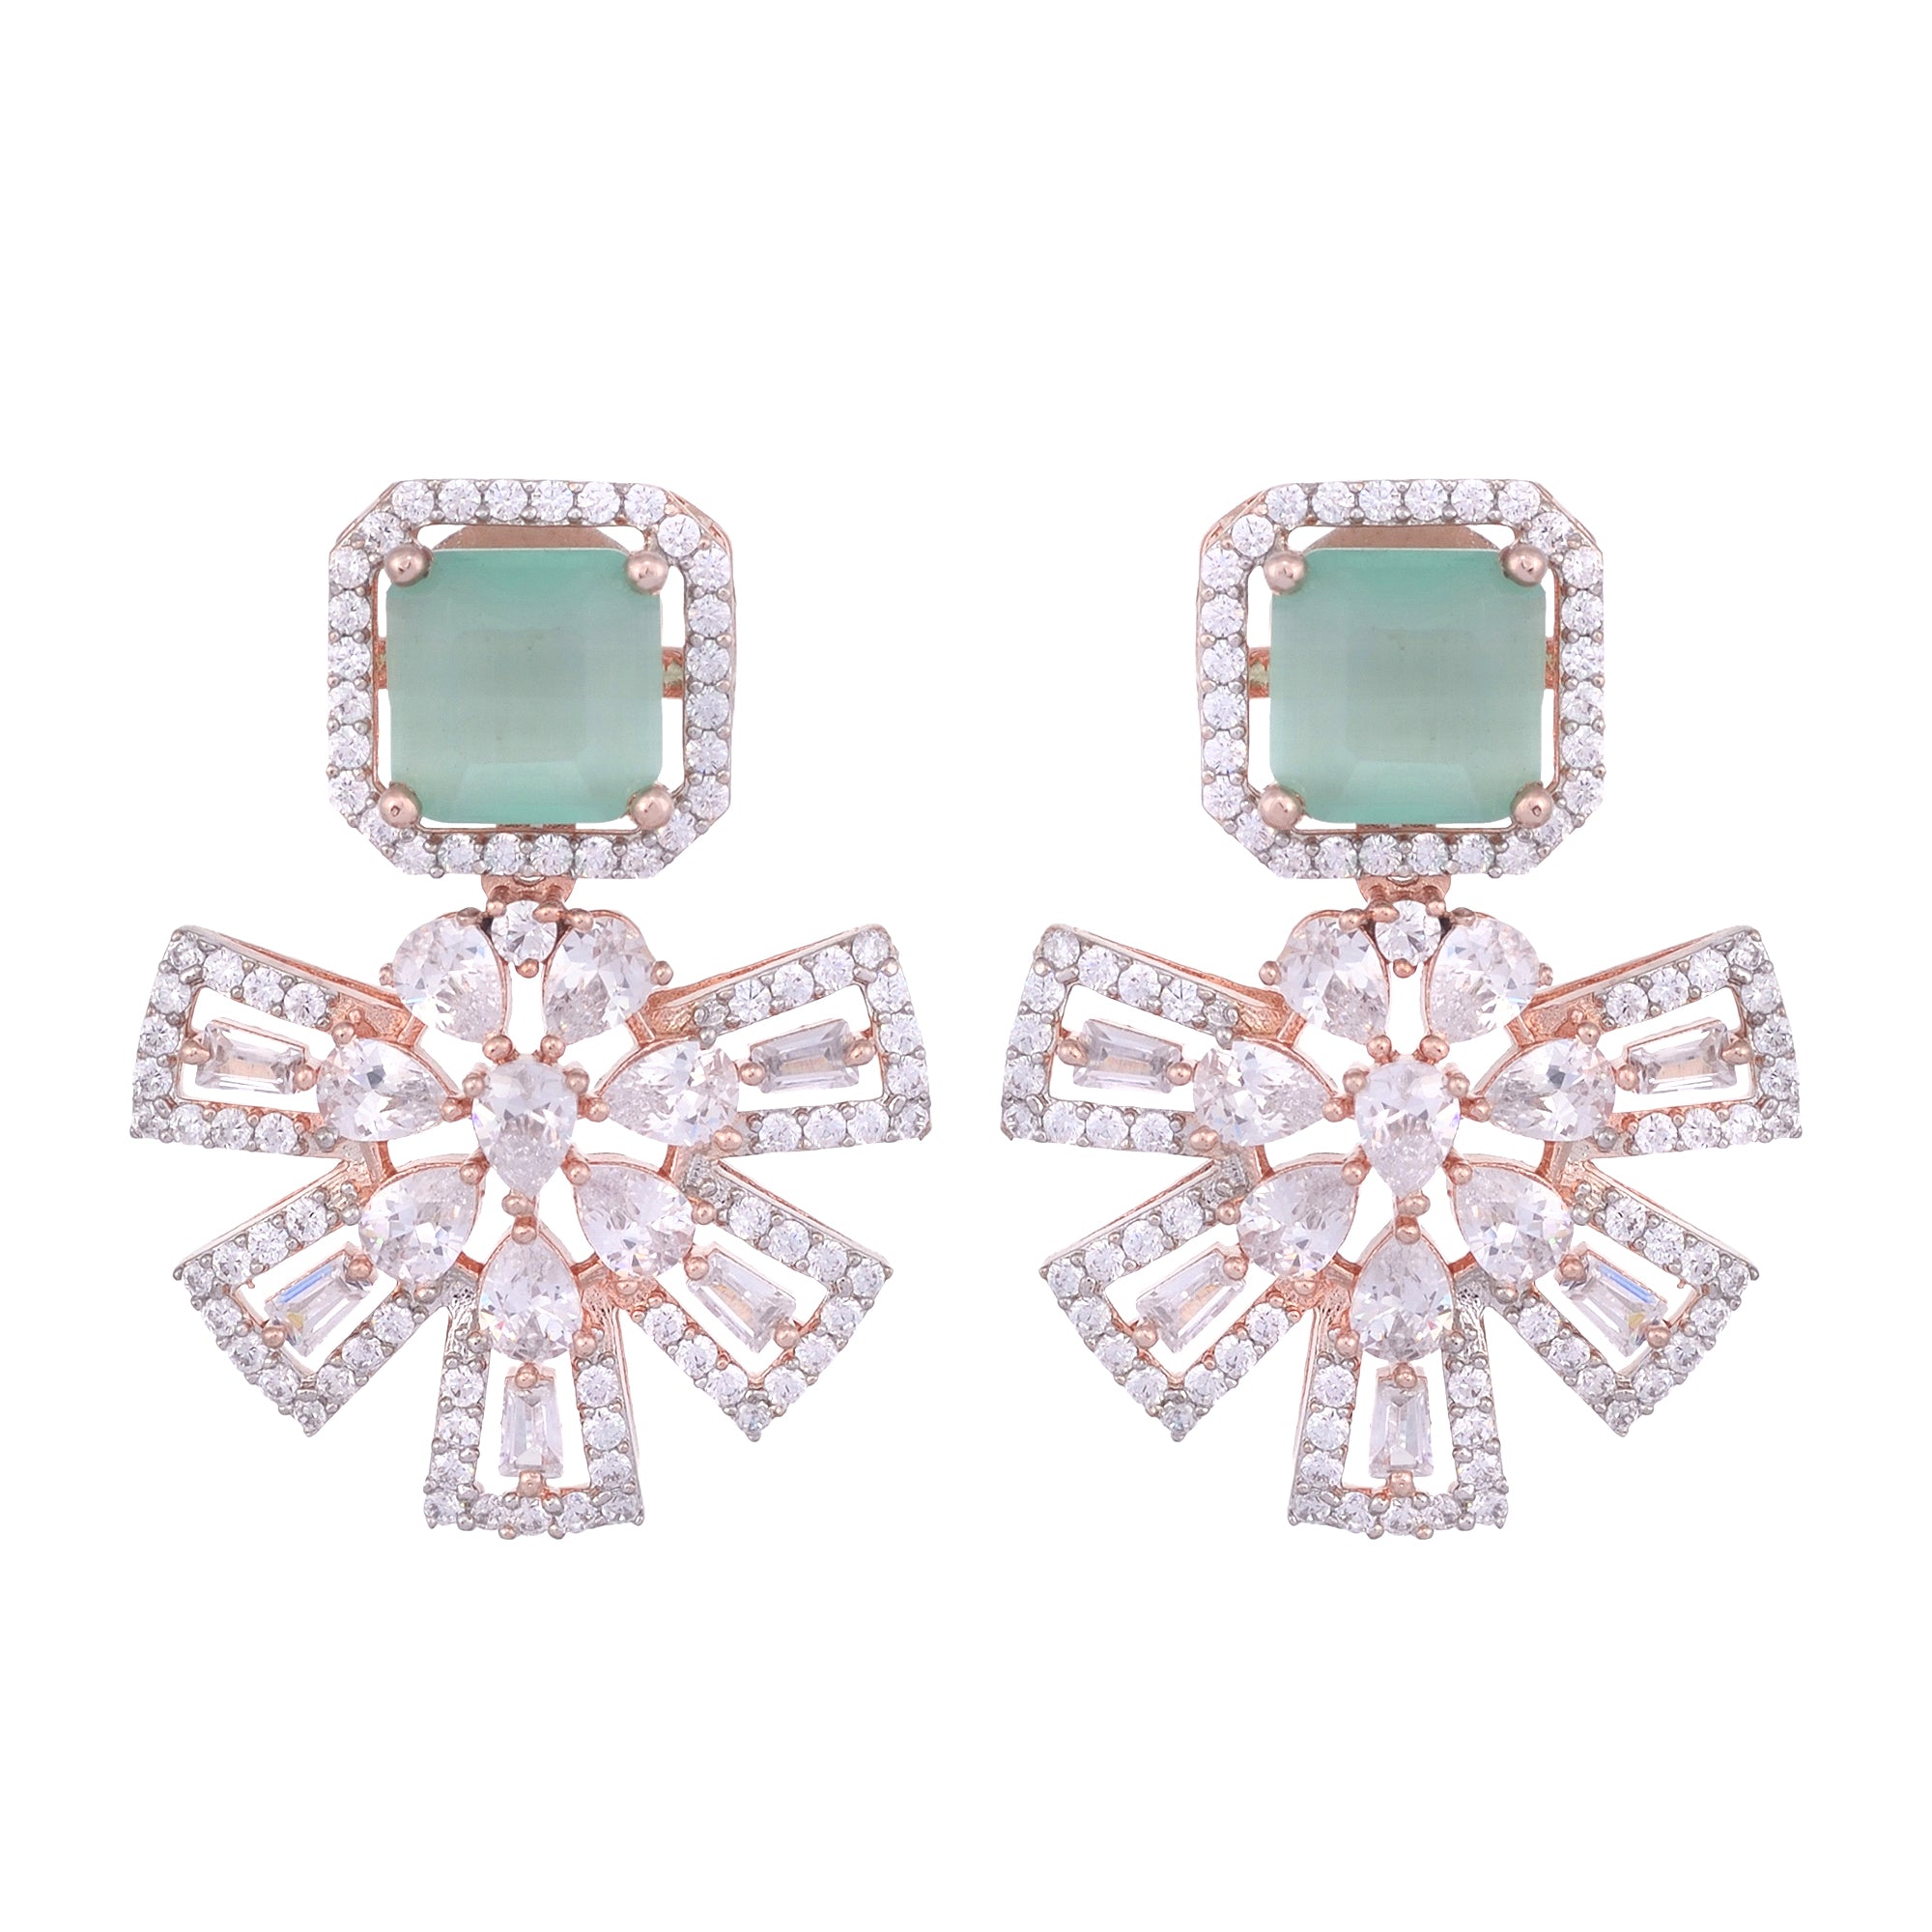 Exquisite Turquoise Floral Design Pastel Blue Earrings Rose Gold Plated American Diamond Studded for Women and Girls - Saraf RS Jewellery